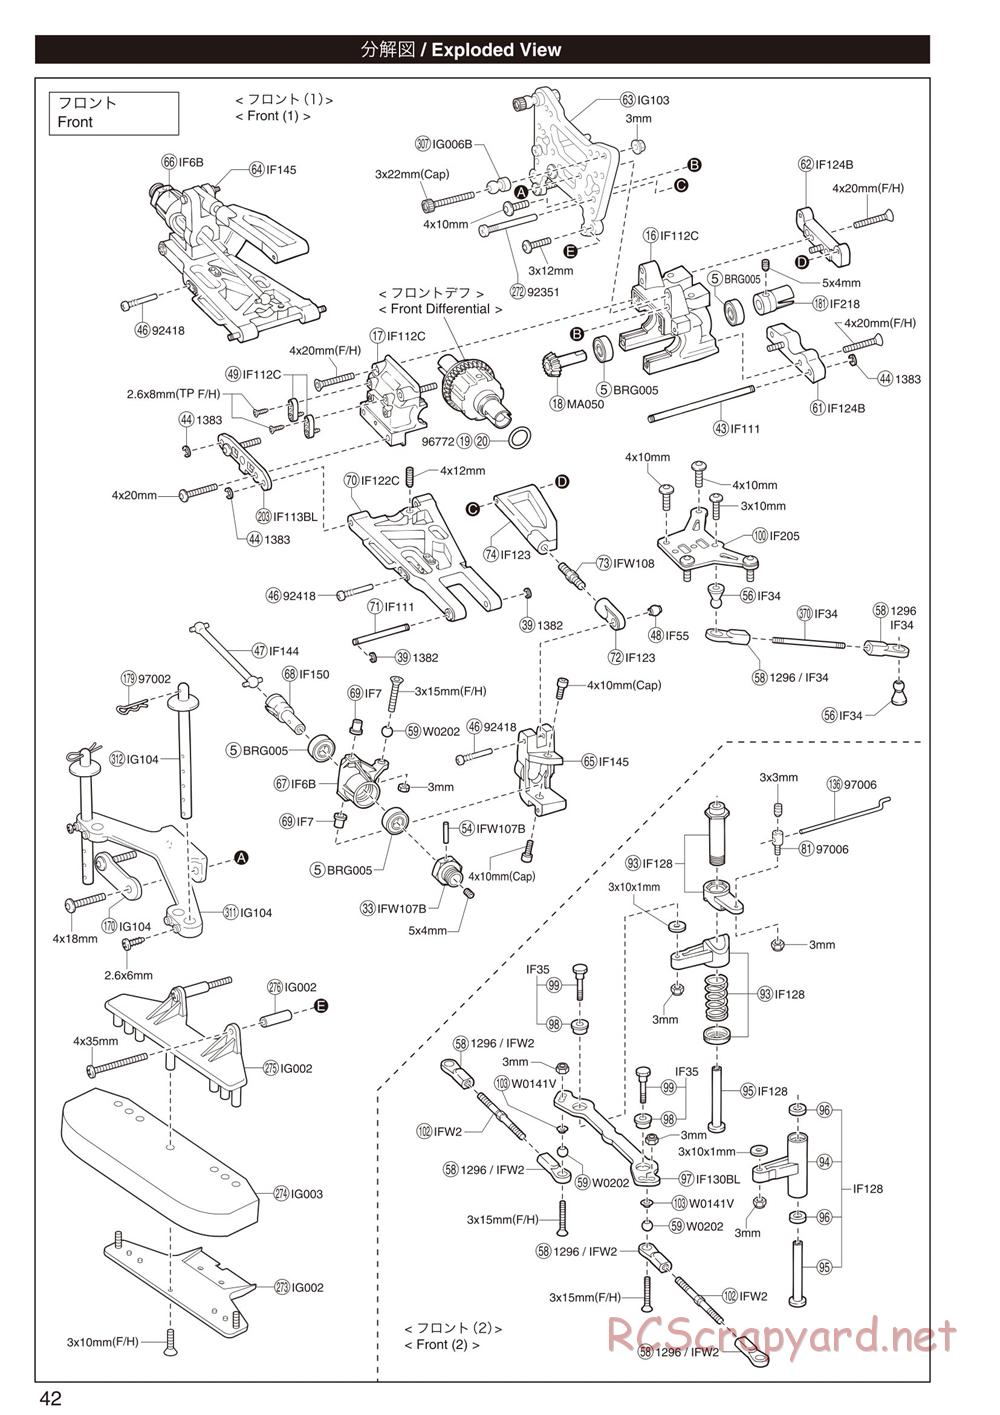 Kyosho - Inferno GT2 - Exploded Views - Page 2